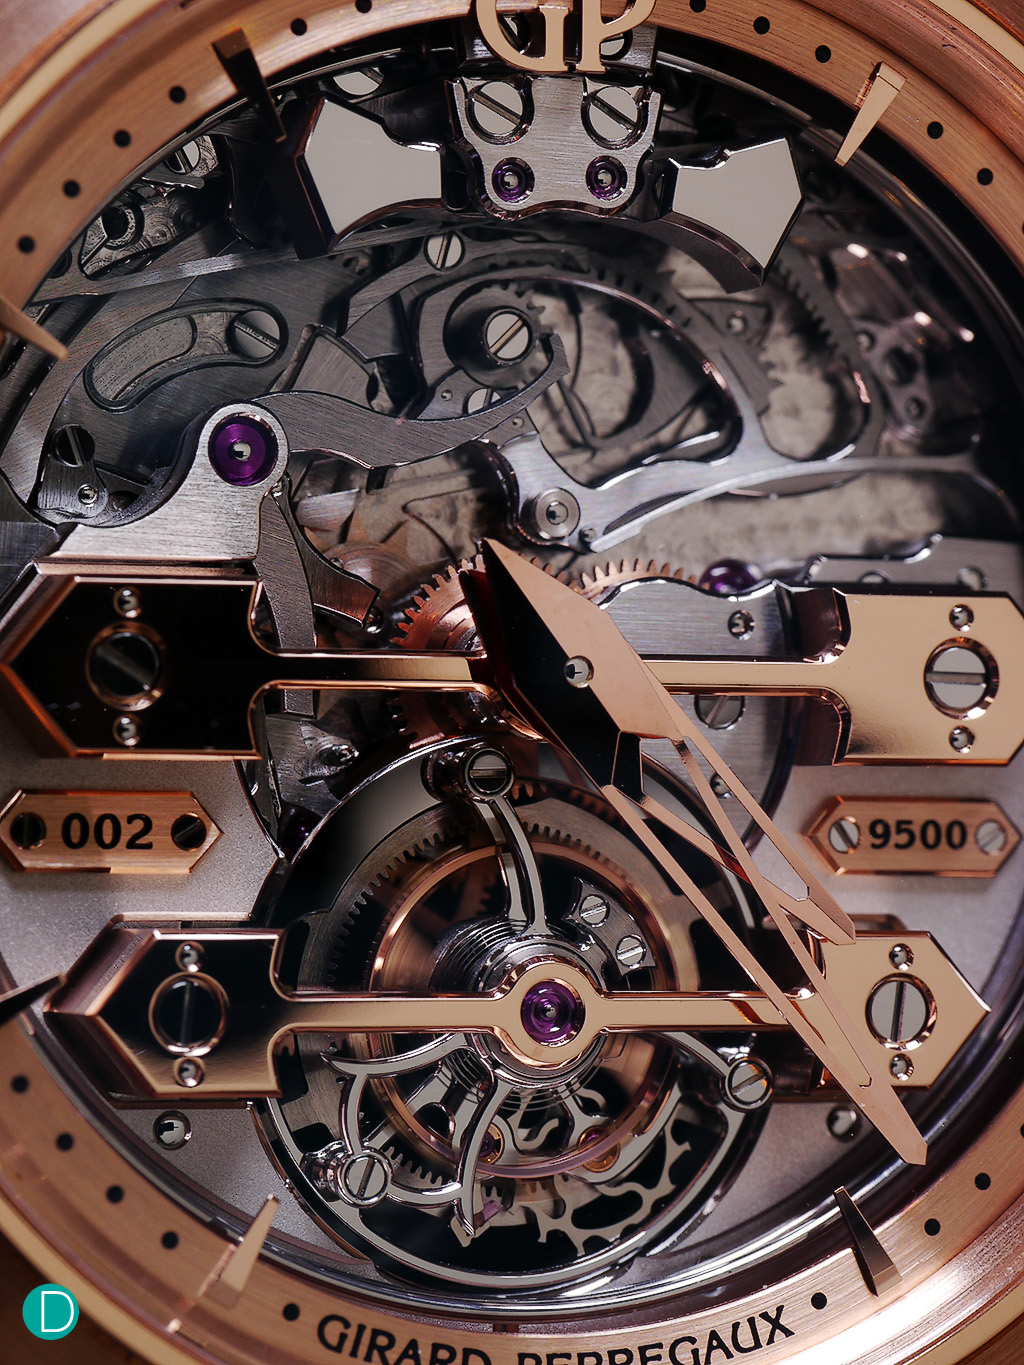 The GP 99820, two gold bridges in traditional GP fashion, and the third removed to show the racks of the striking mechanism.